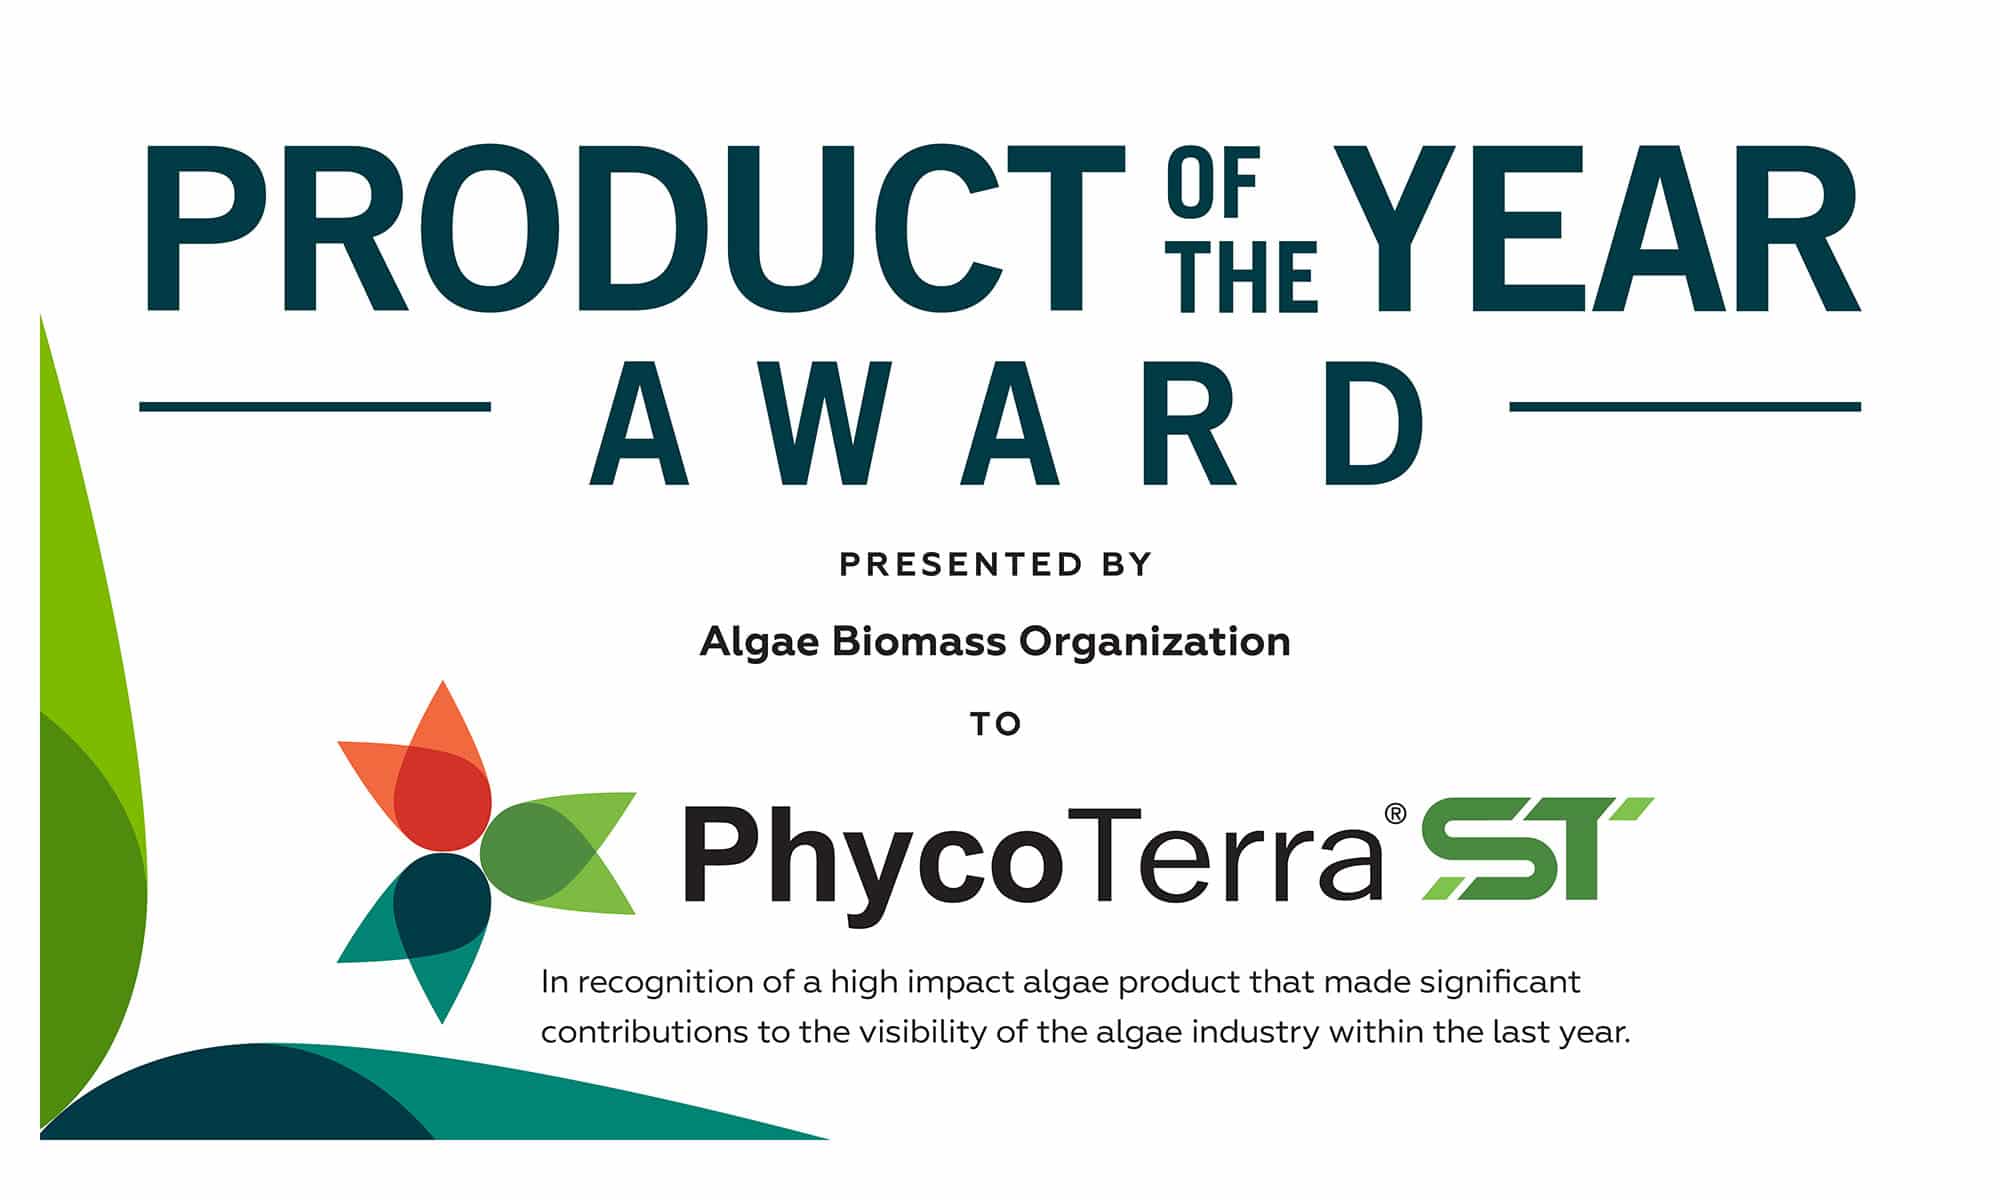 phycoterra wins ABO product of year